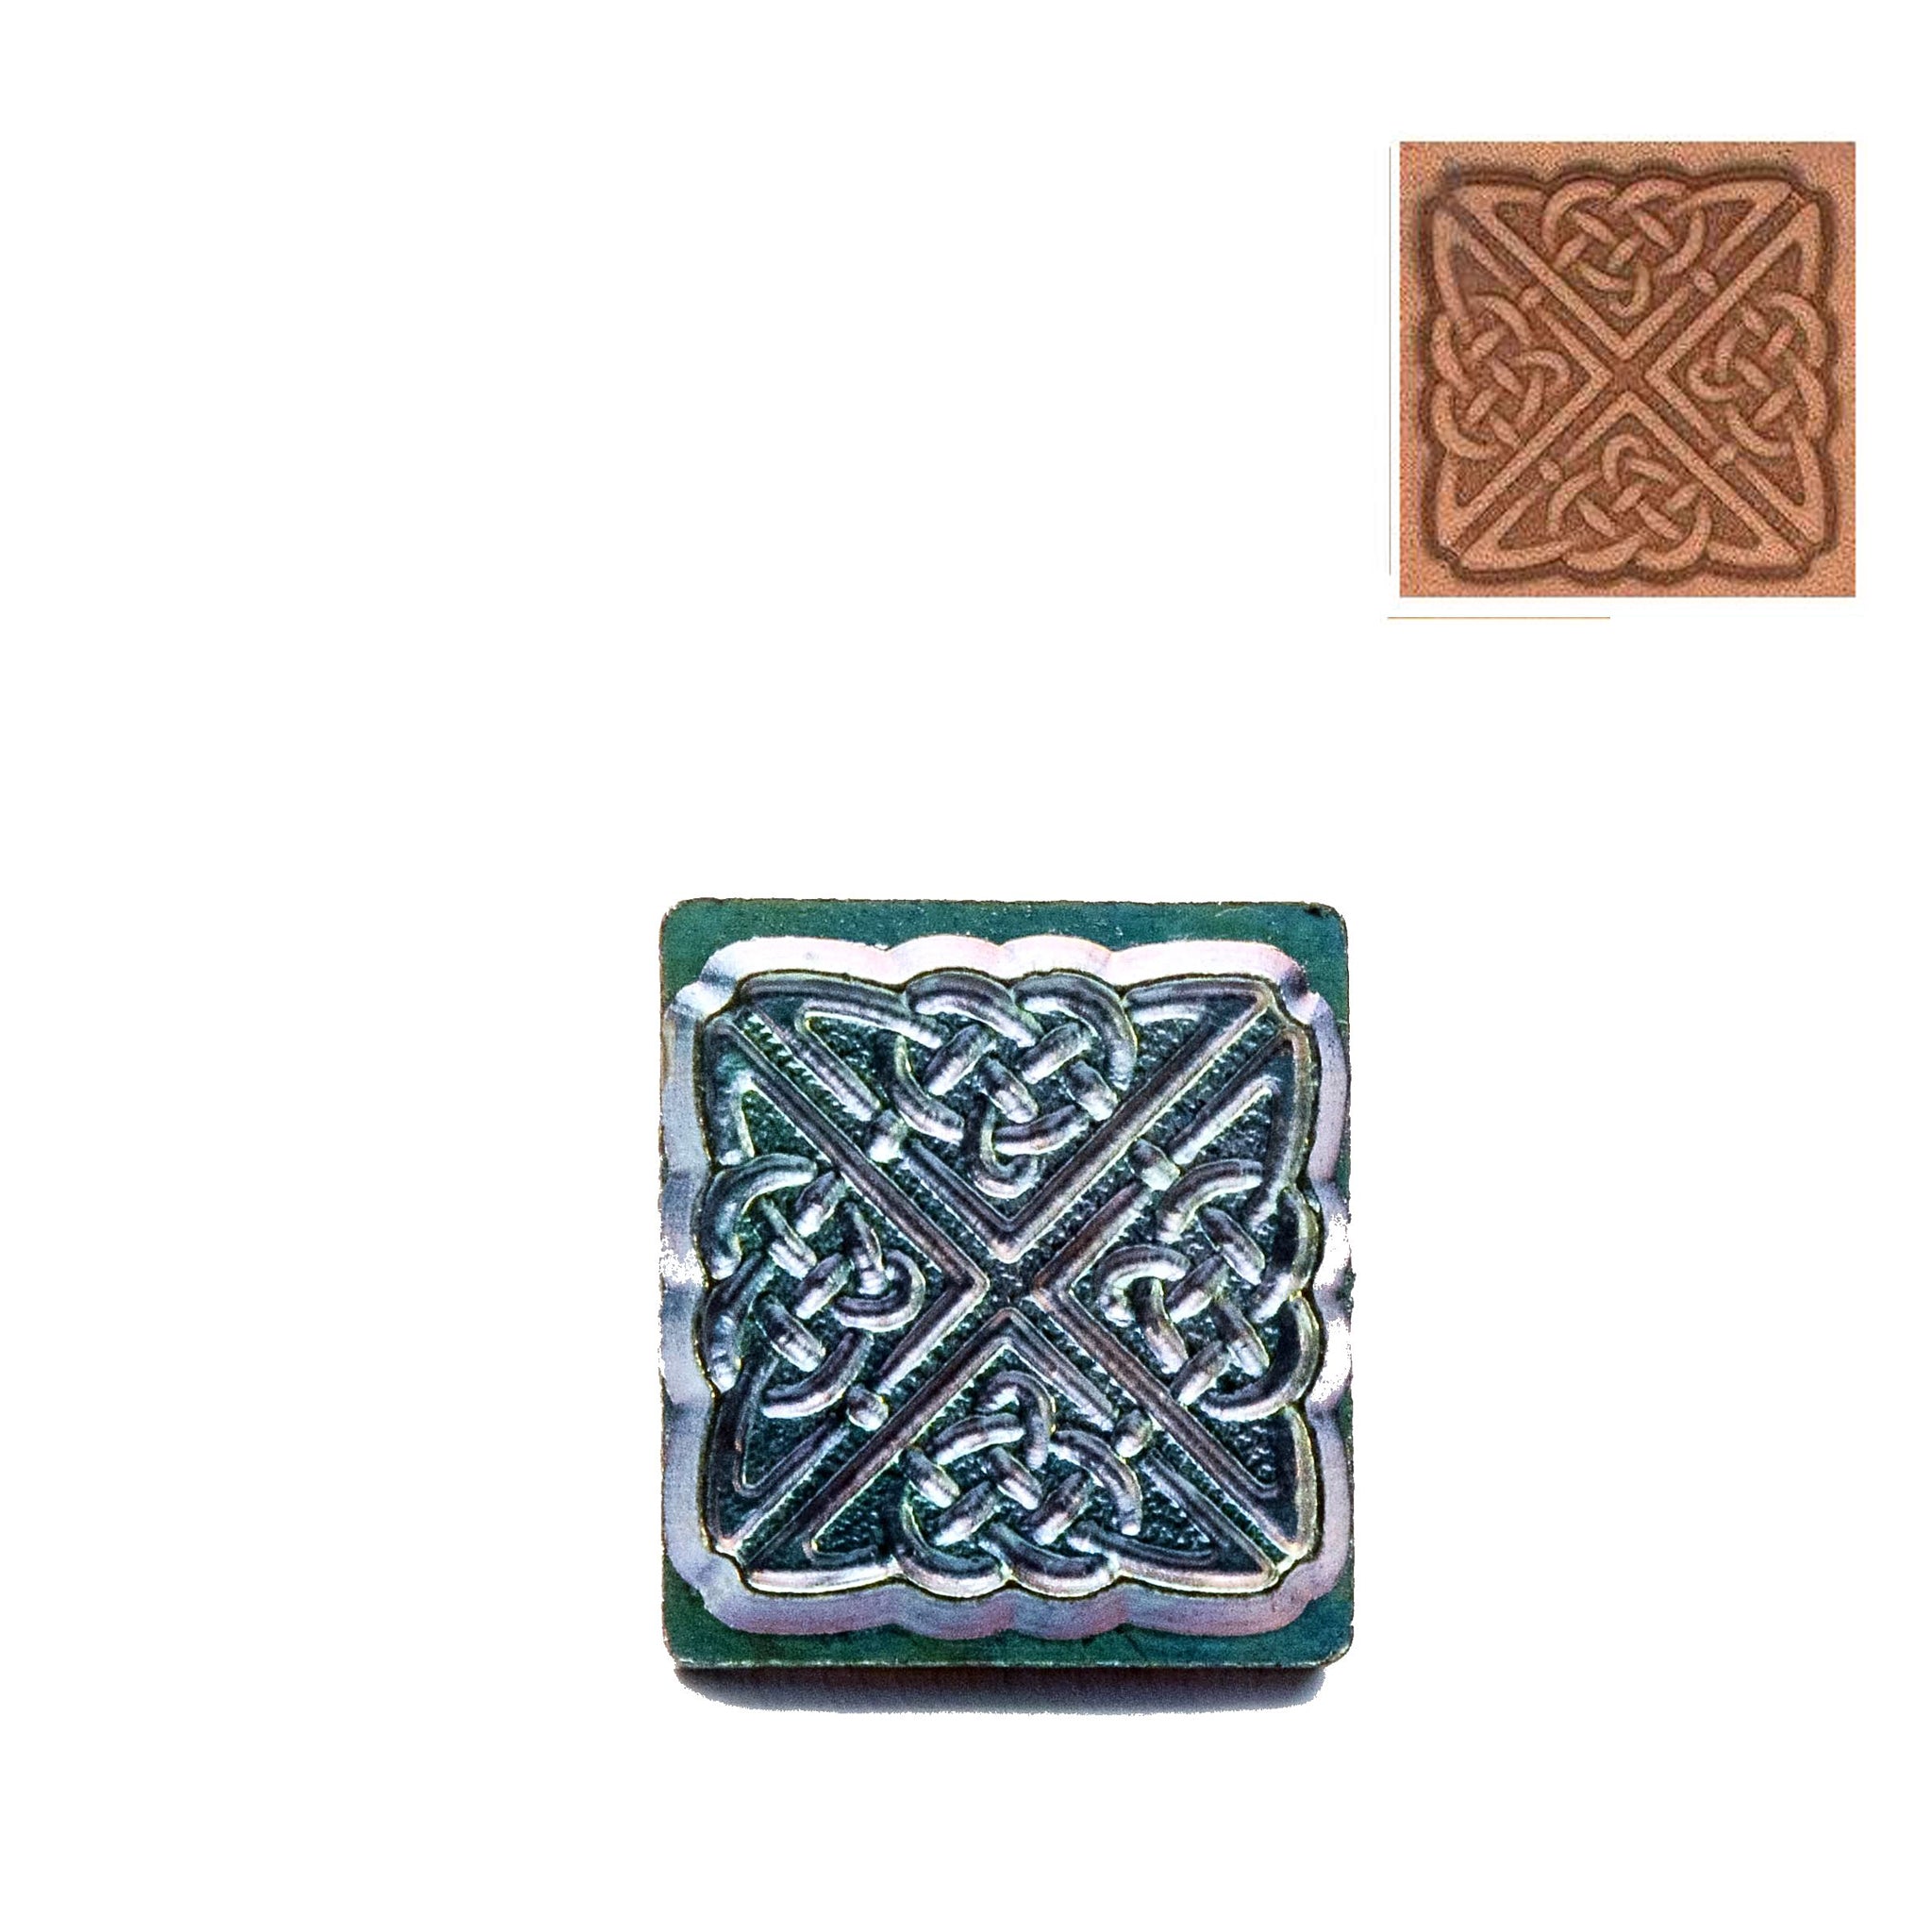 Celtic Knot Square 3D Embossing Stamp from Identity Leathercraft